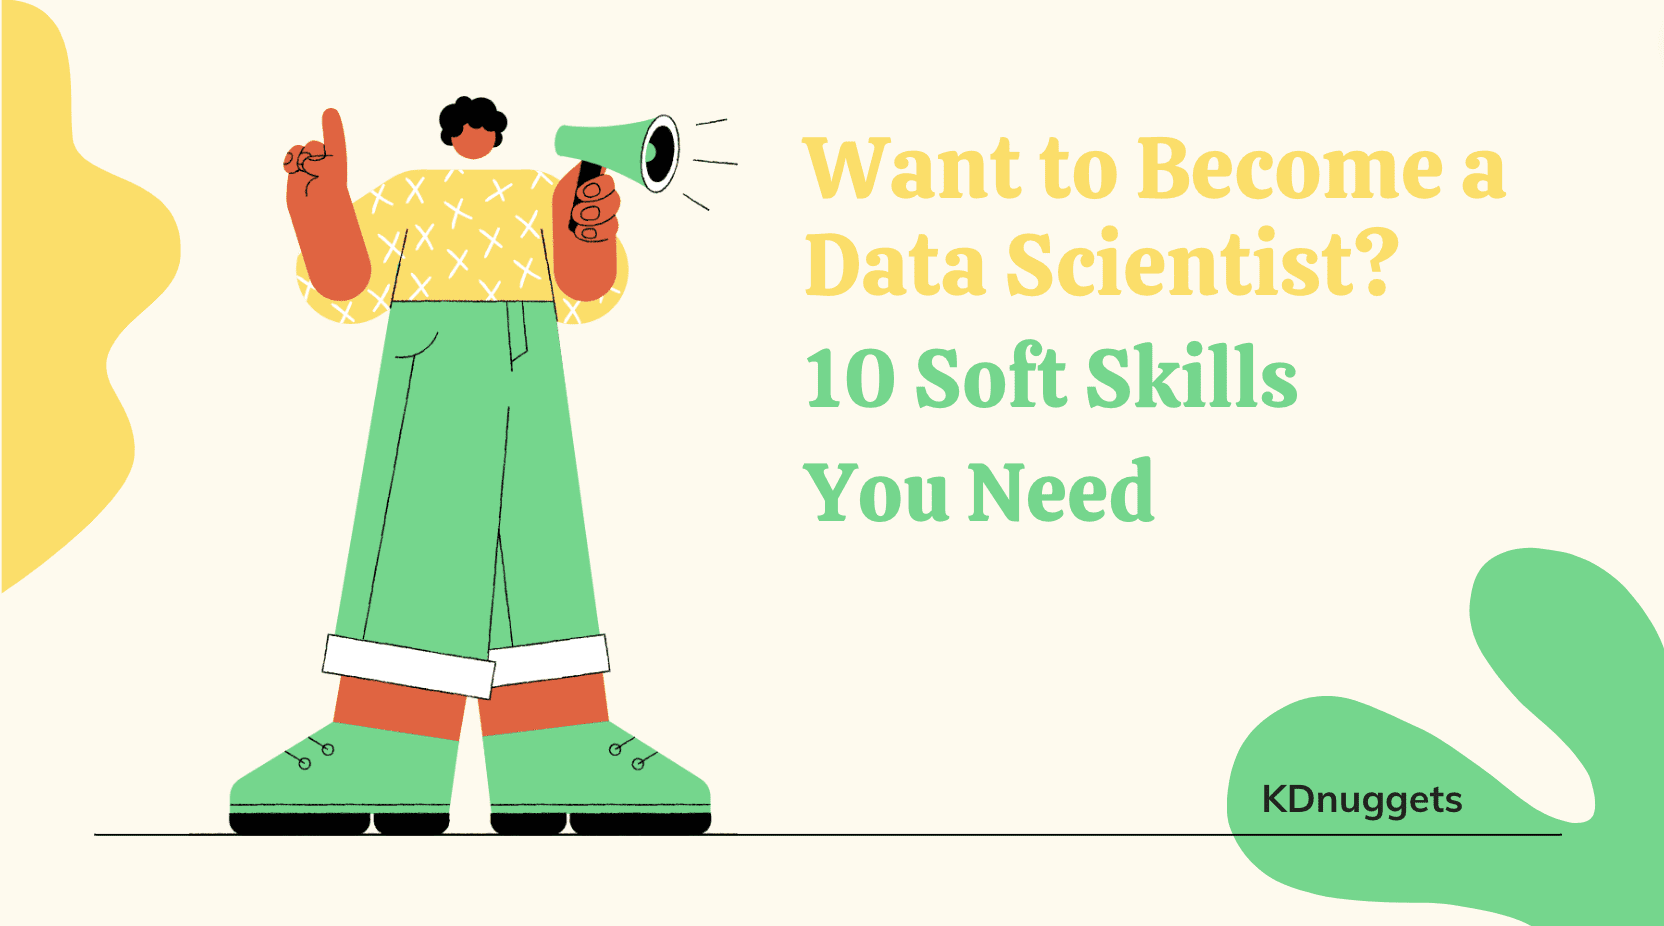 Want to Become a Data Scientist? Part 2: 10 Soft Skills You Need